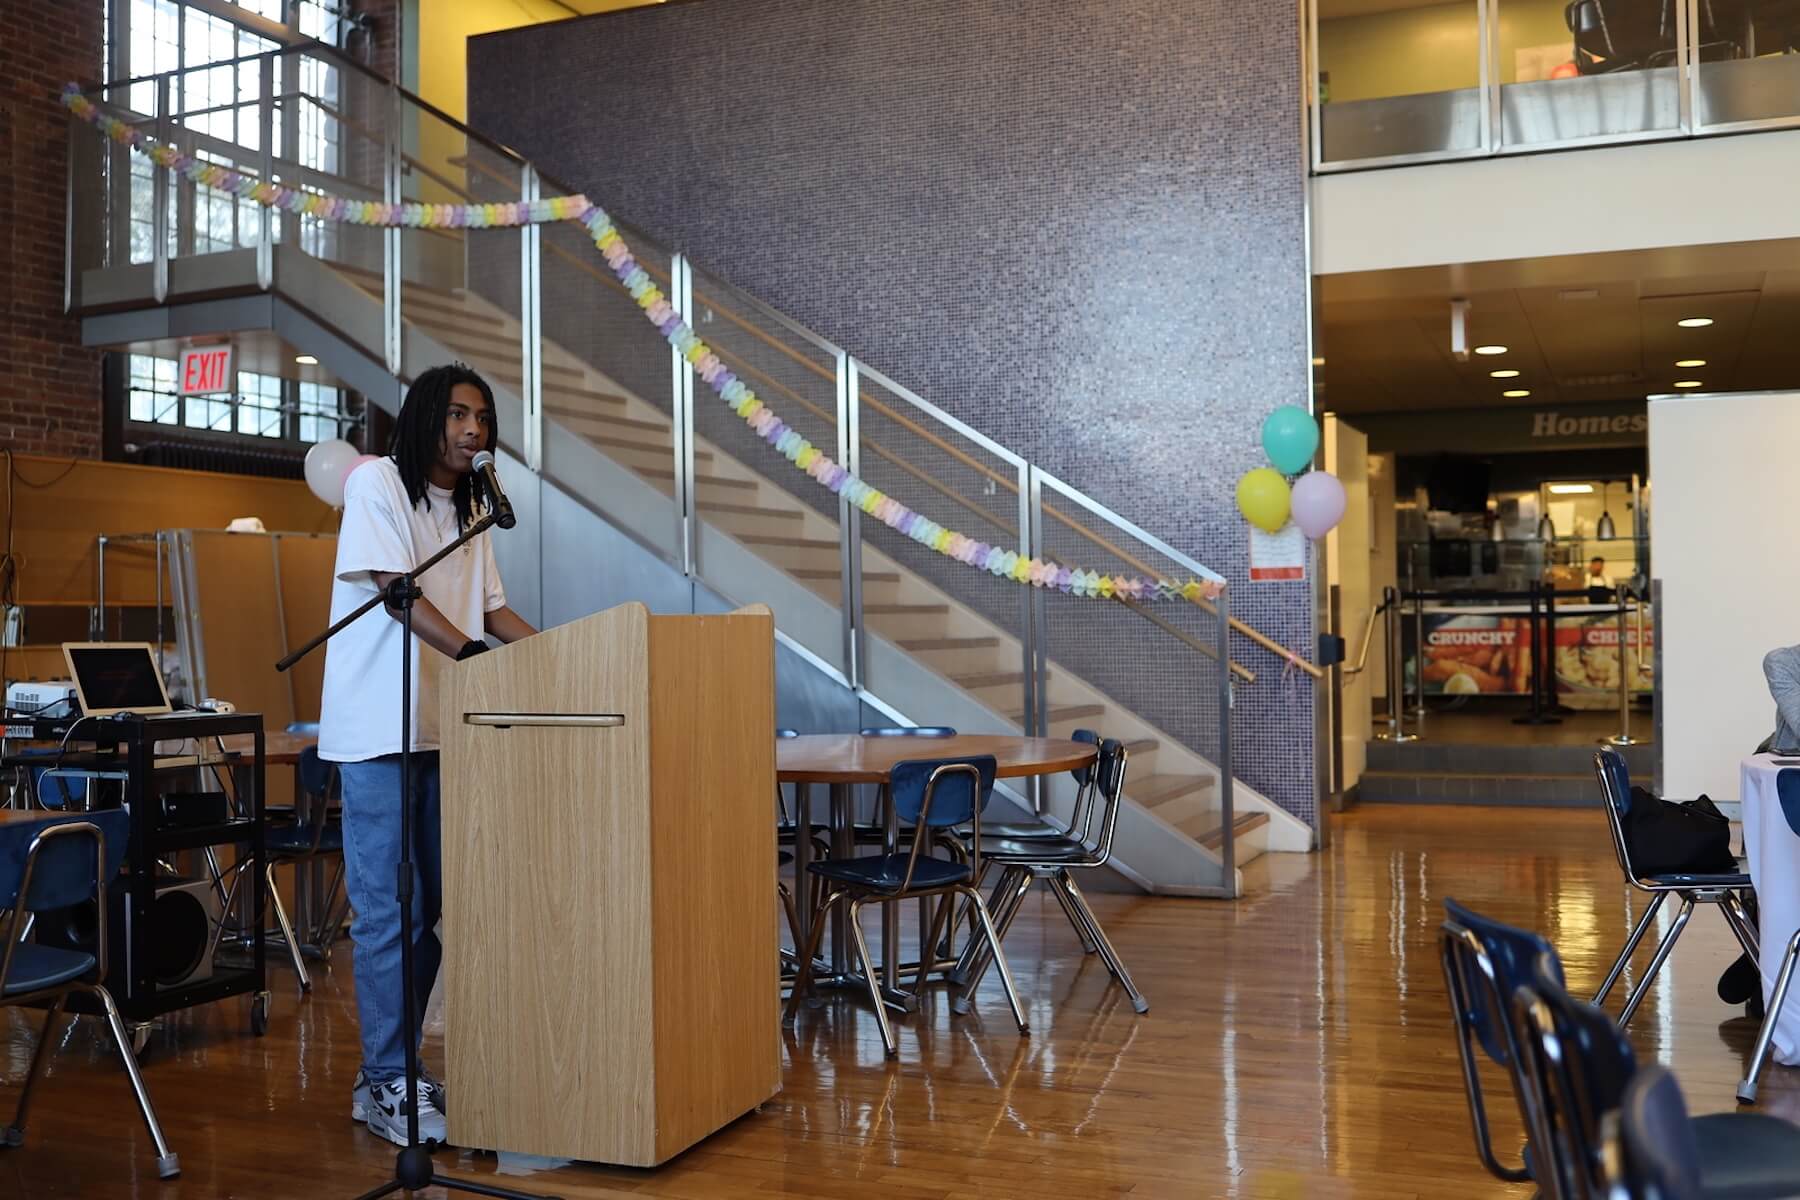 ECFS student speaks at podium at Bridge to Bridge year-end celebration in the Dining Hall.